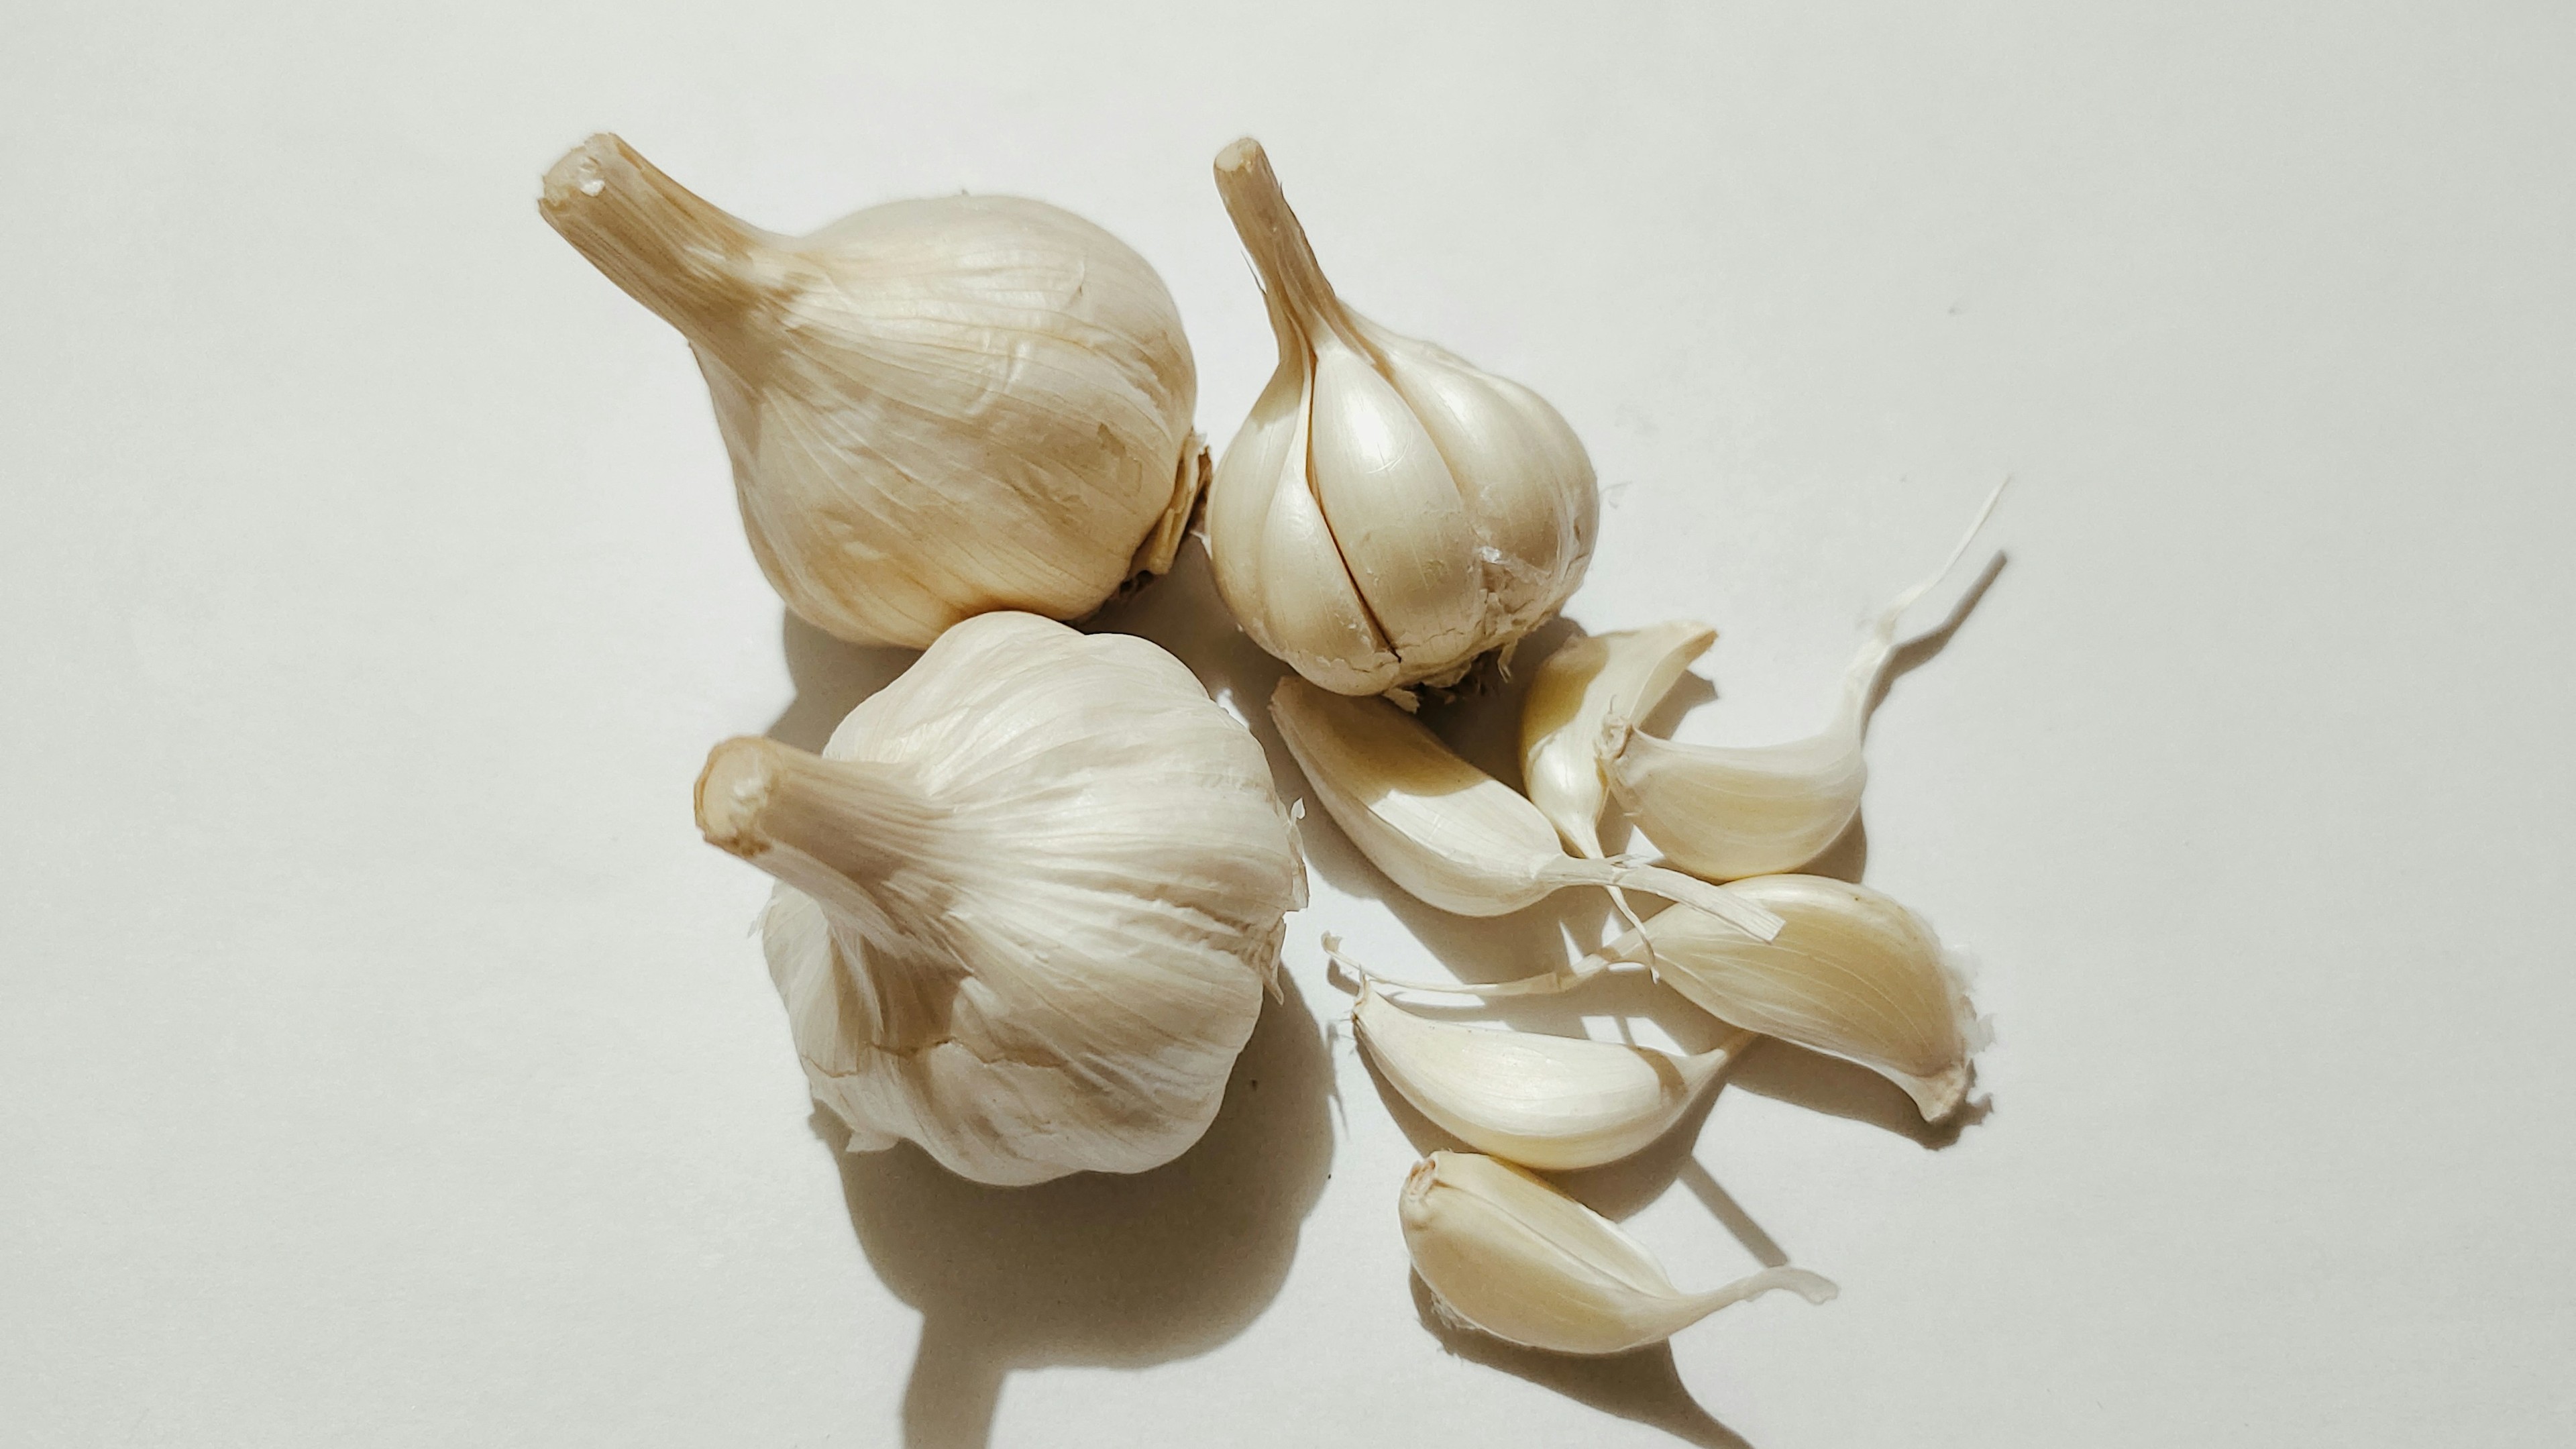 3 bulbs of garlic with several cloves